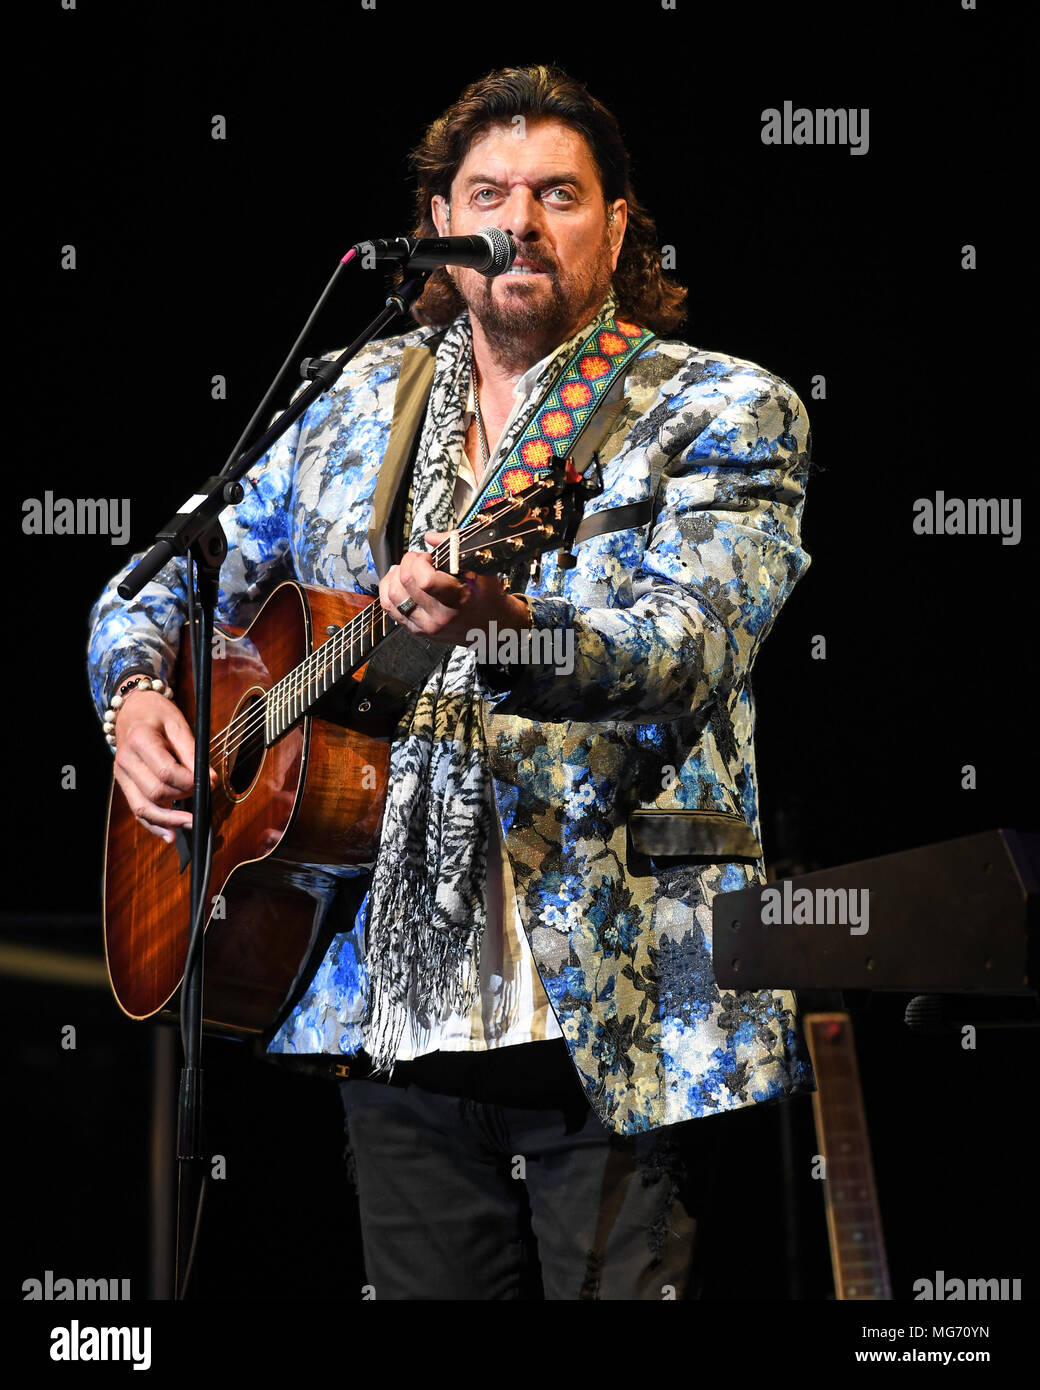 Fort Lauderdale FL, USA. 26th Apr, 2018. Alan Parsons performs at The Broward Center on April 26, 2018 in Fort Lauderdale, Florida. Credit: Mpi04/Media Punch/Alamy Live News Stock Photo